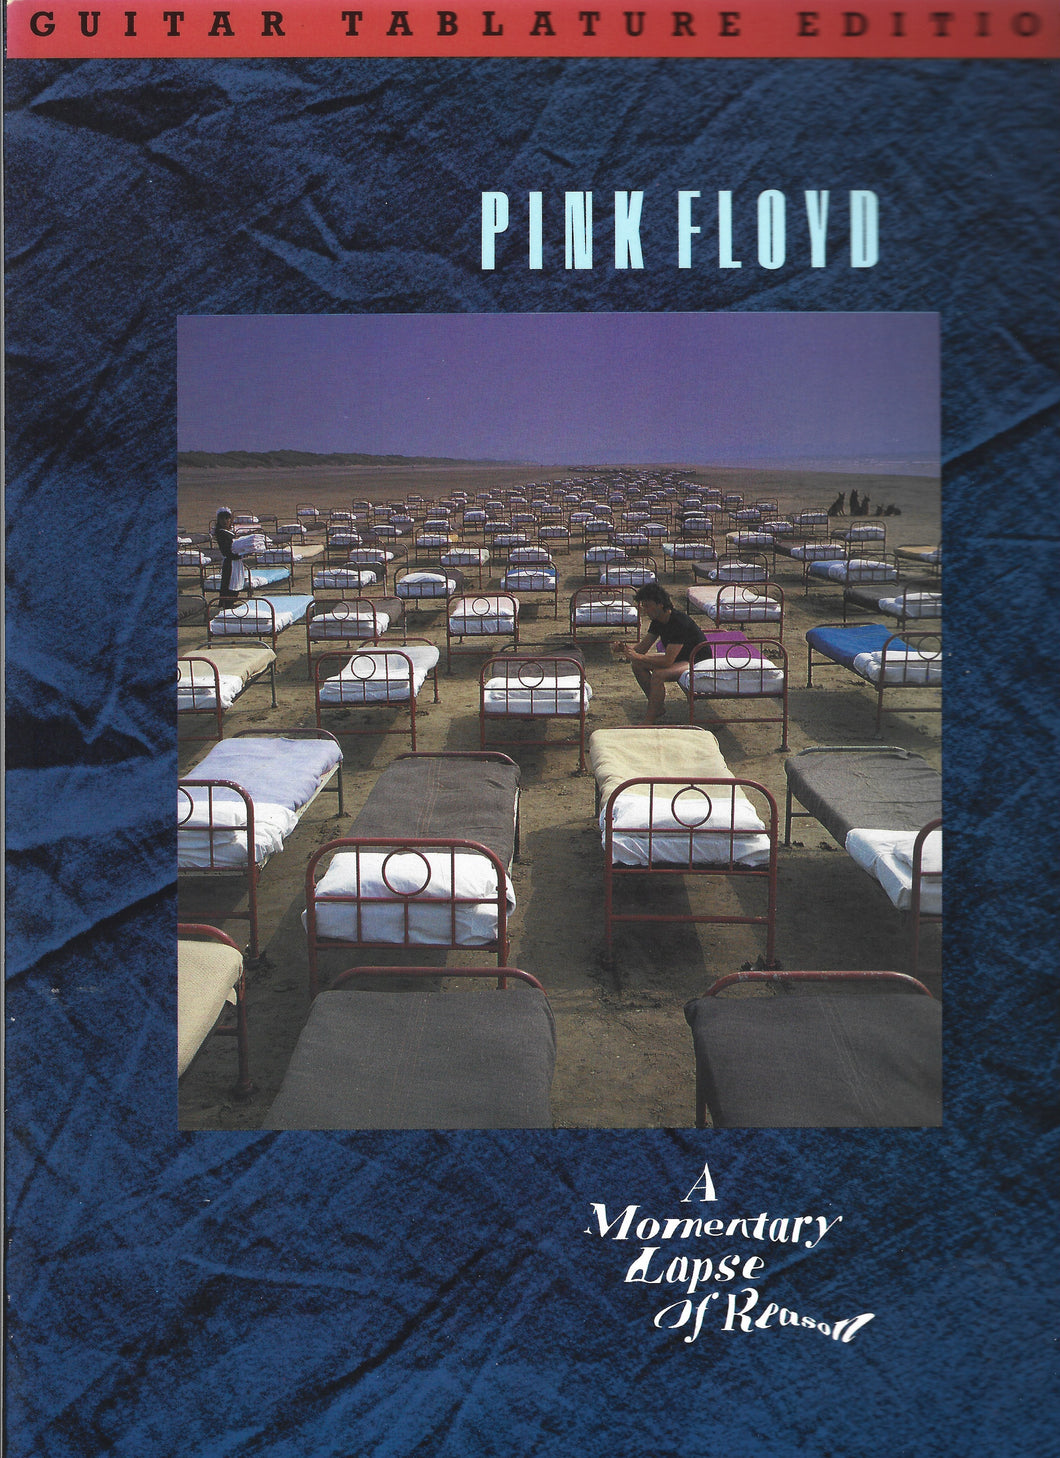 Pink Floyd A Momentary Lapse of Reason Guitar Tab Published by Music Publishers Ltd.